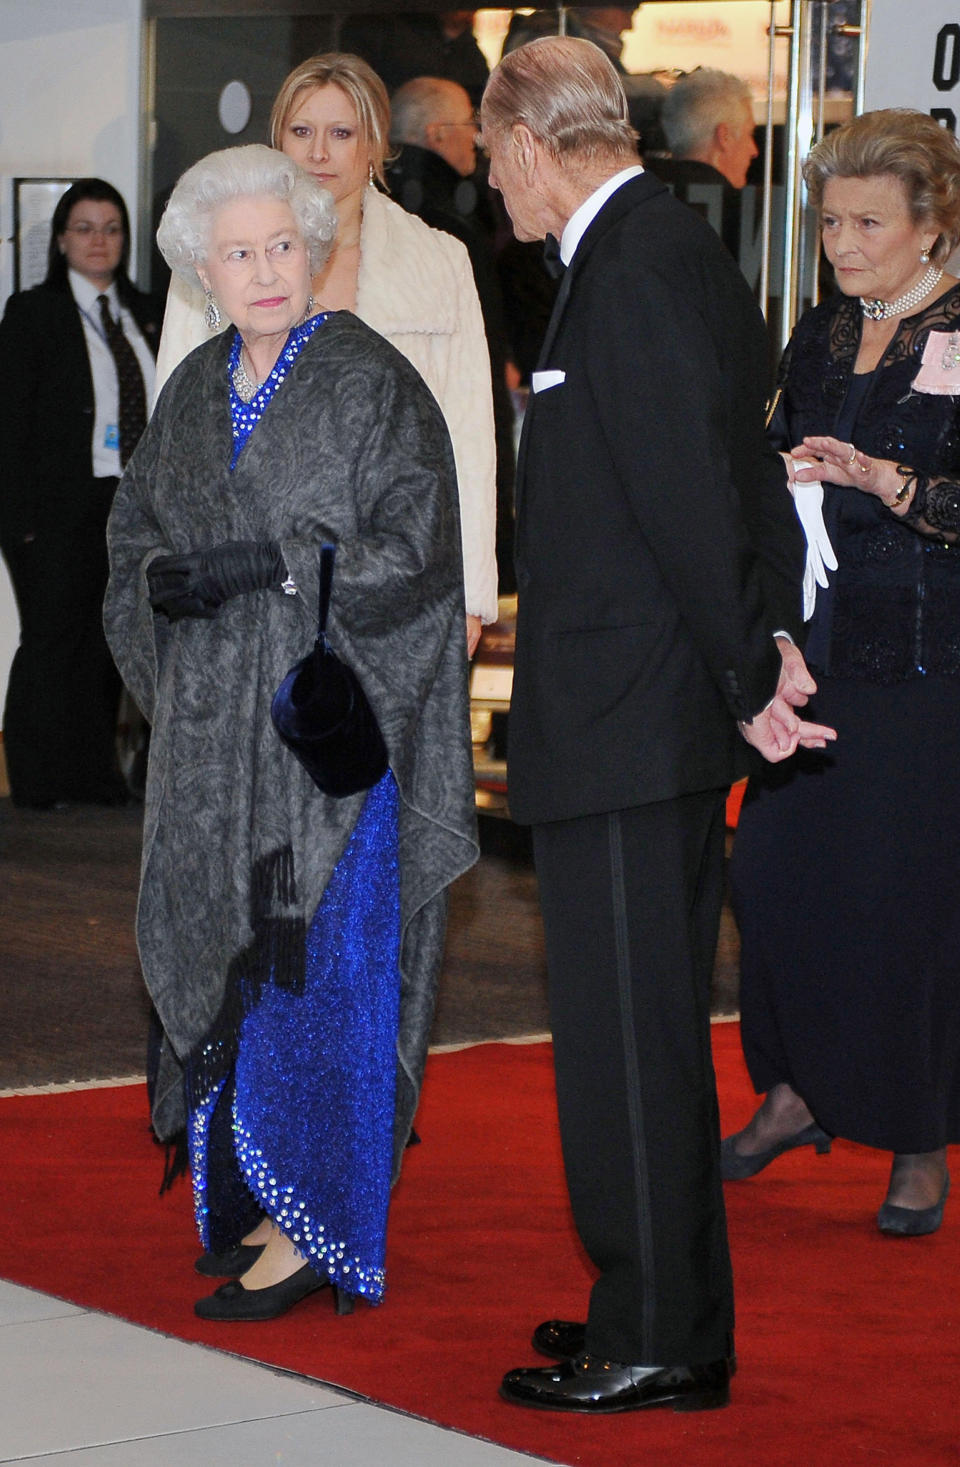 <p>The Queen graced the red carpet for the premiere of ‘The Chronicles of Narnia: The Voyage of the Dawn Treader’ back in 2010. For the occasion, Her Majesty donned a cobalt blue gown complete with a grey shawl. <em>[Photo: Getty]</em> </p>